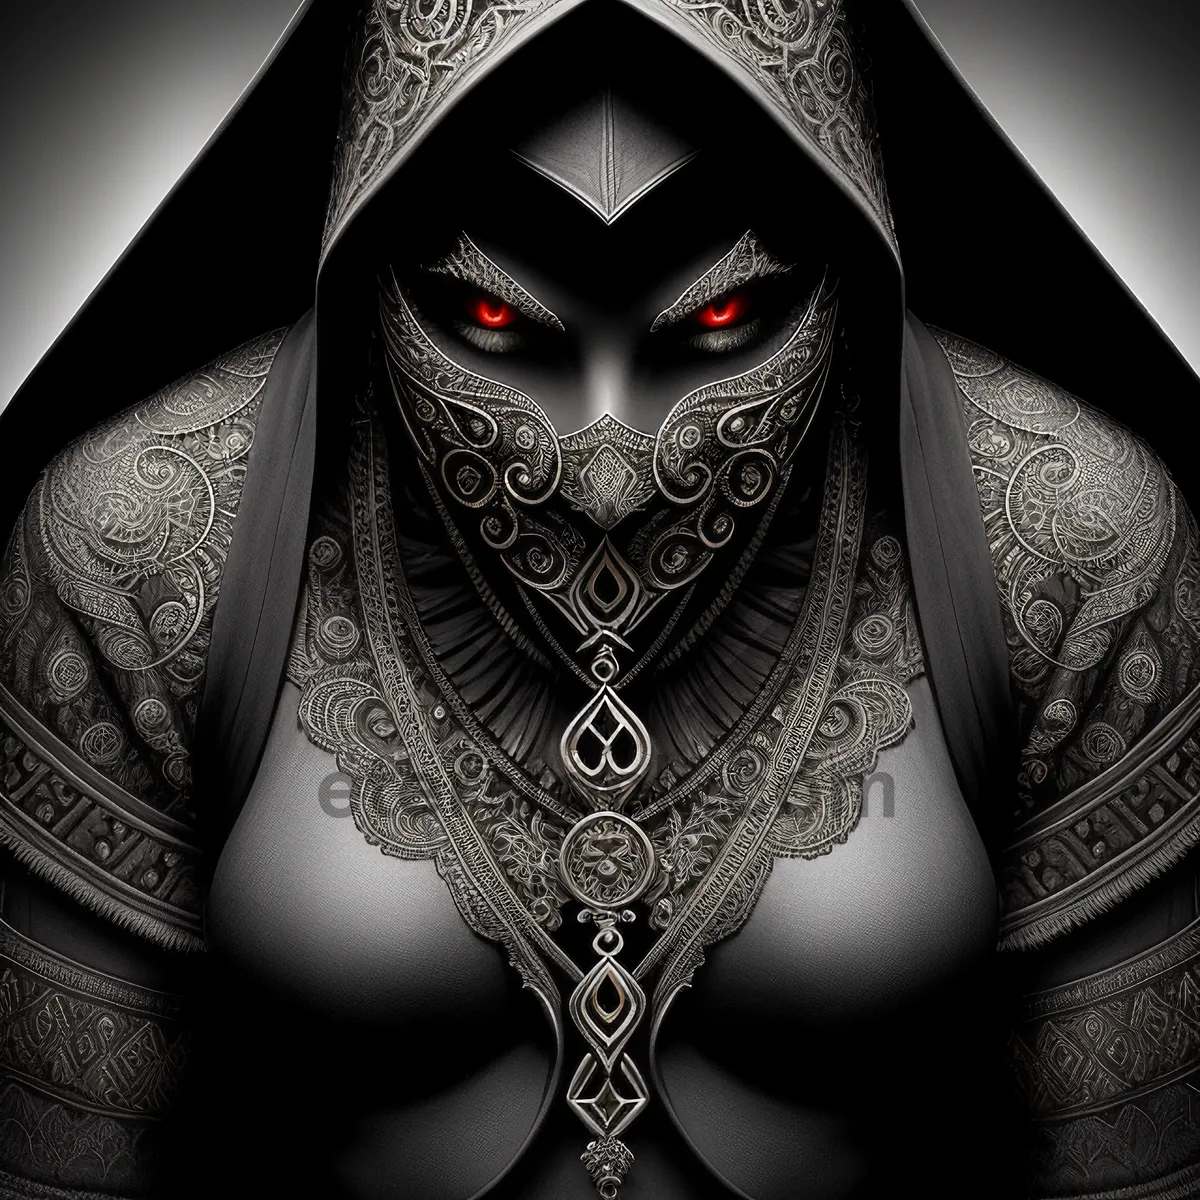 Picture of Mysterious Lady in Black: Designer Mask with Tattoos